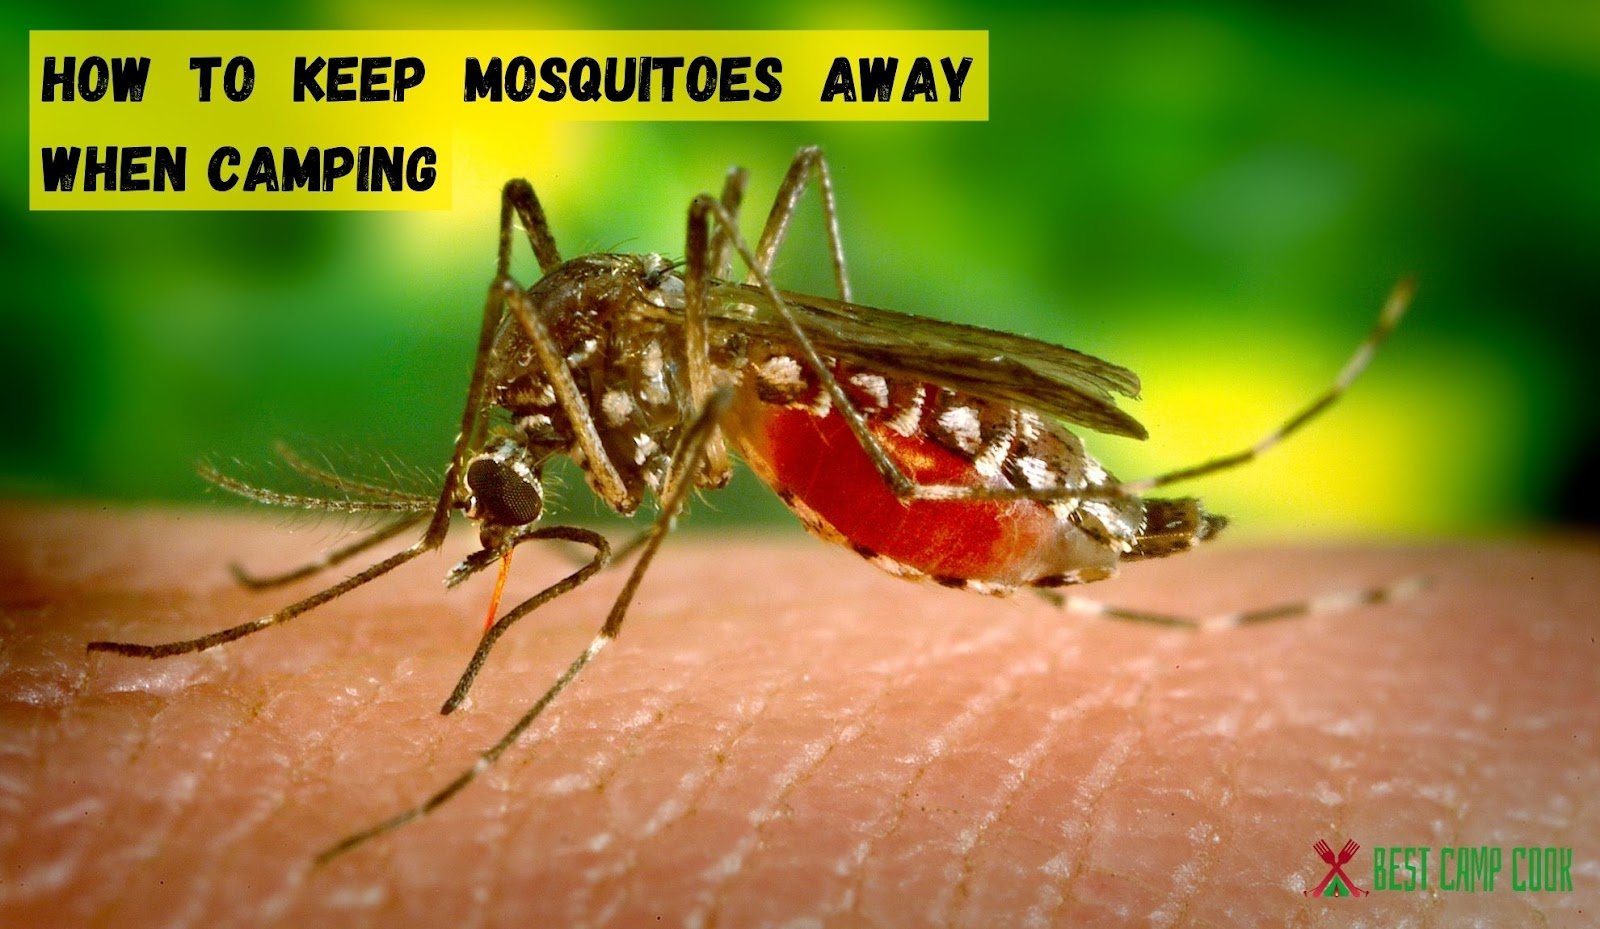 How to Keep Mosquitoes Away When Camping